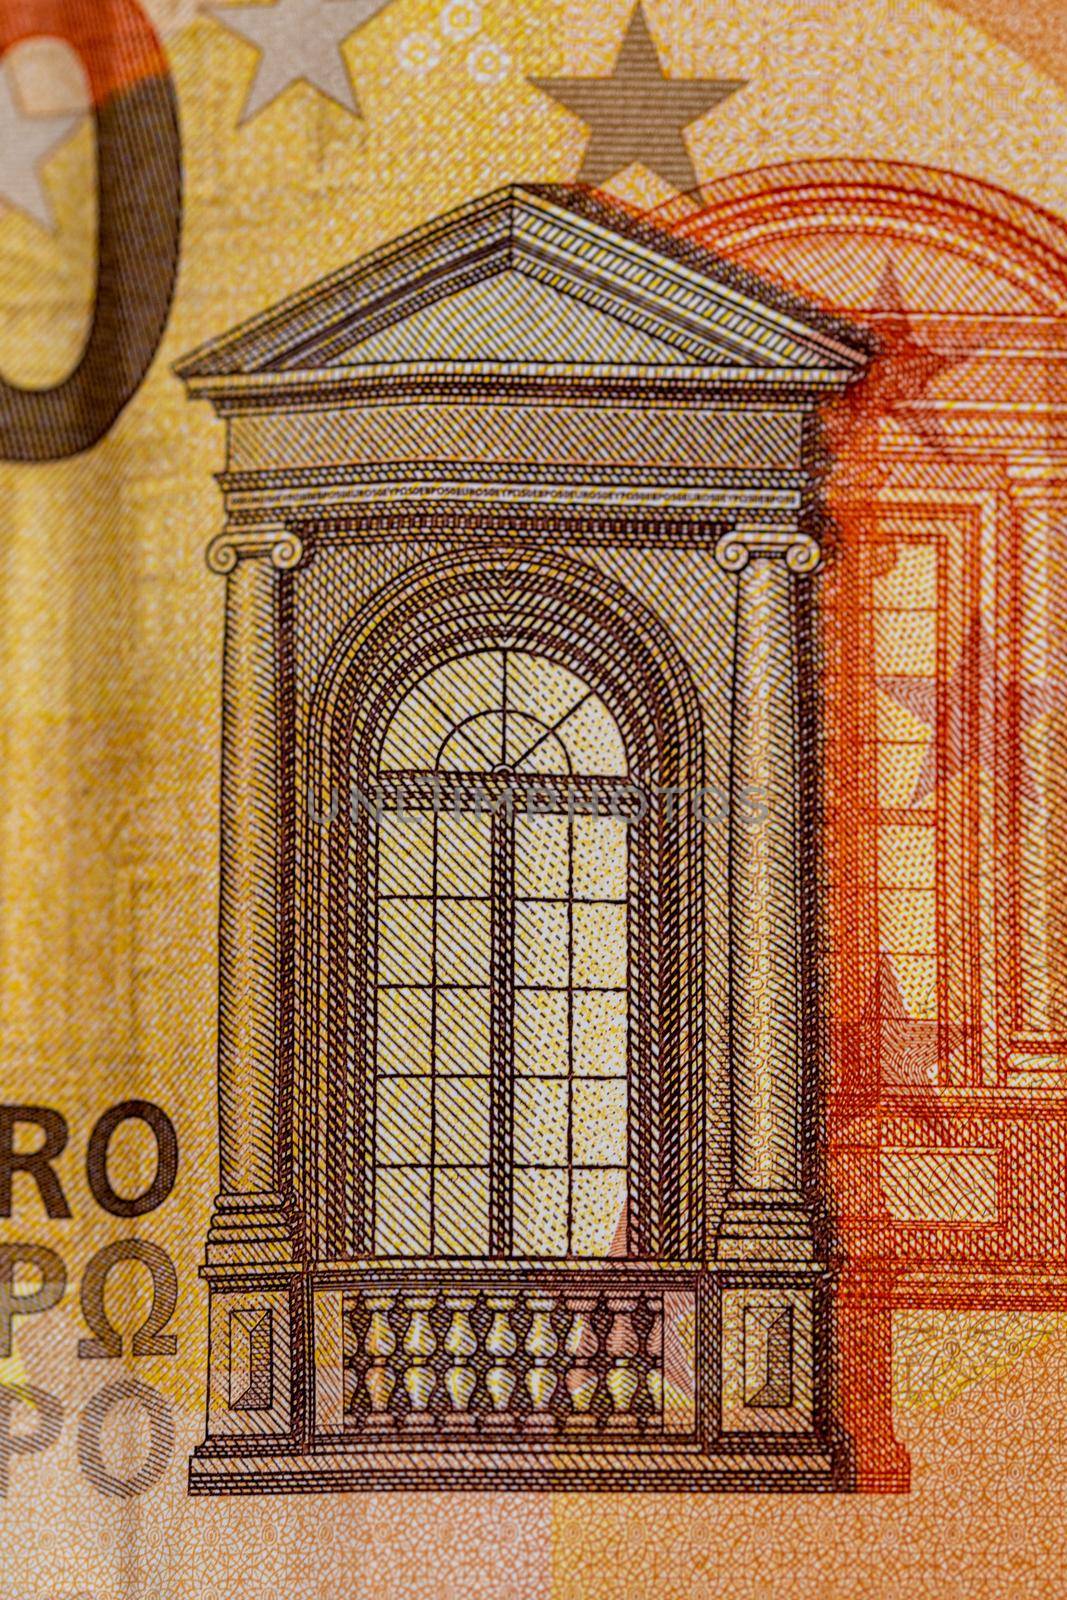 detail of the 50 euro banknote by carfedeph